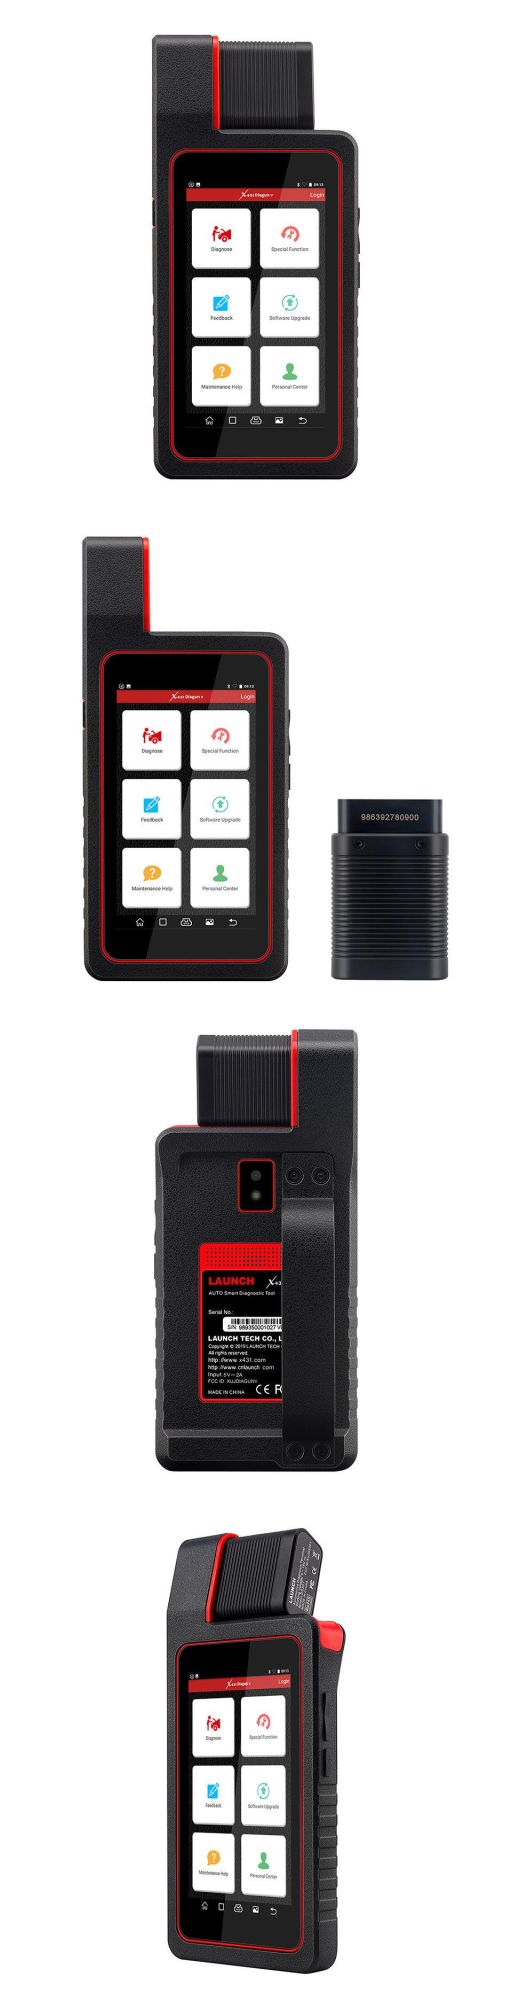 OBD II Code Scanner Launch X431 Diagun V Powerful Diagnotist Tool with 2 Years Free Update